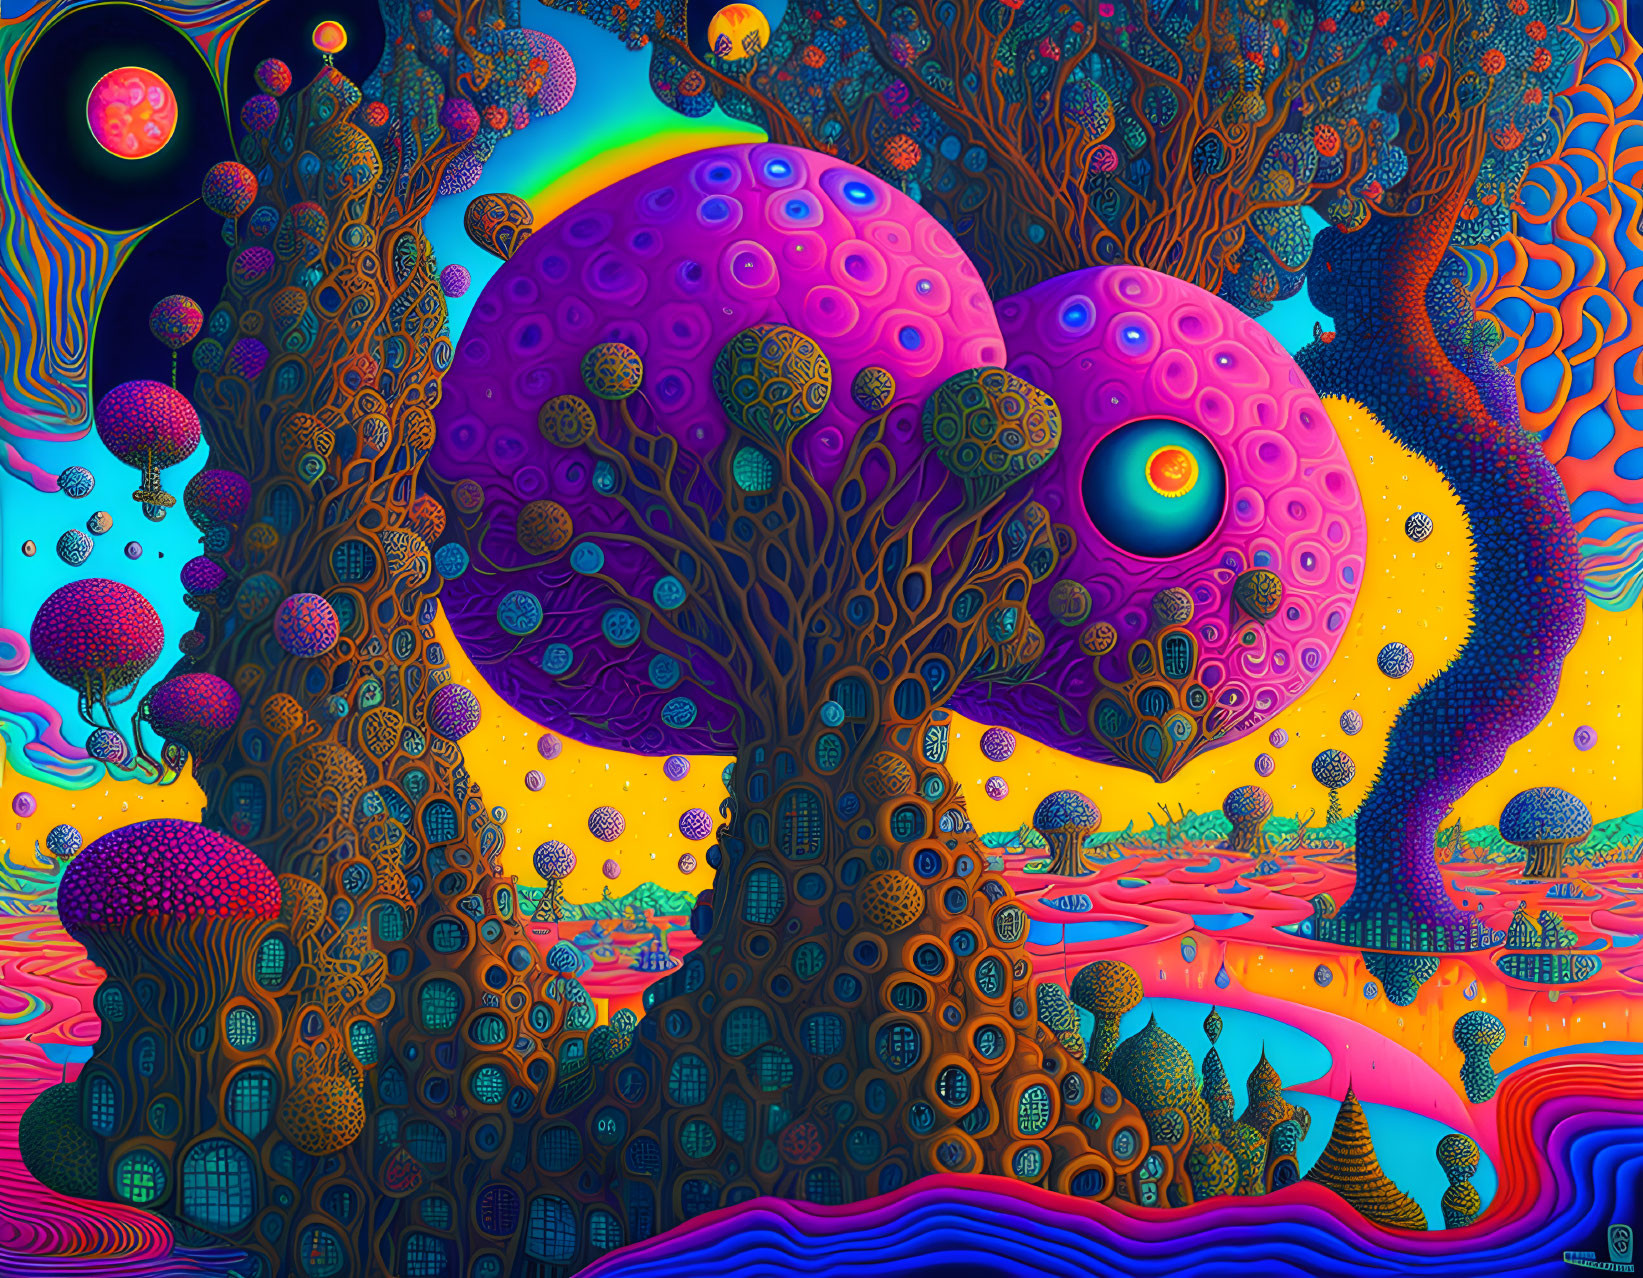 Colorful Psychedelic Landscape with Stylized Trees and Swirling Skies